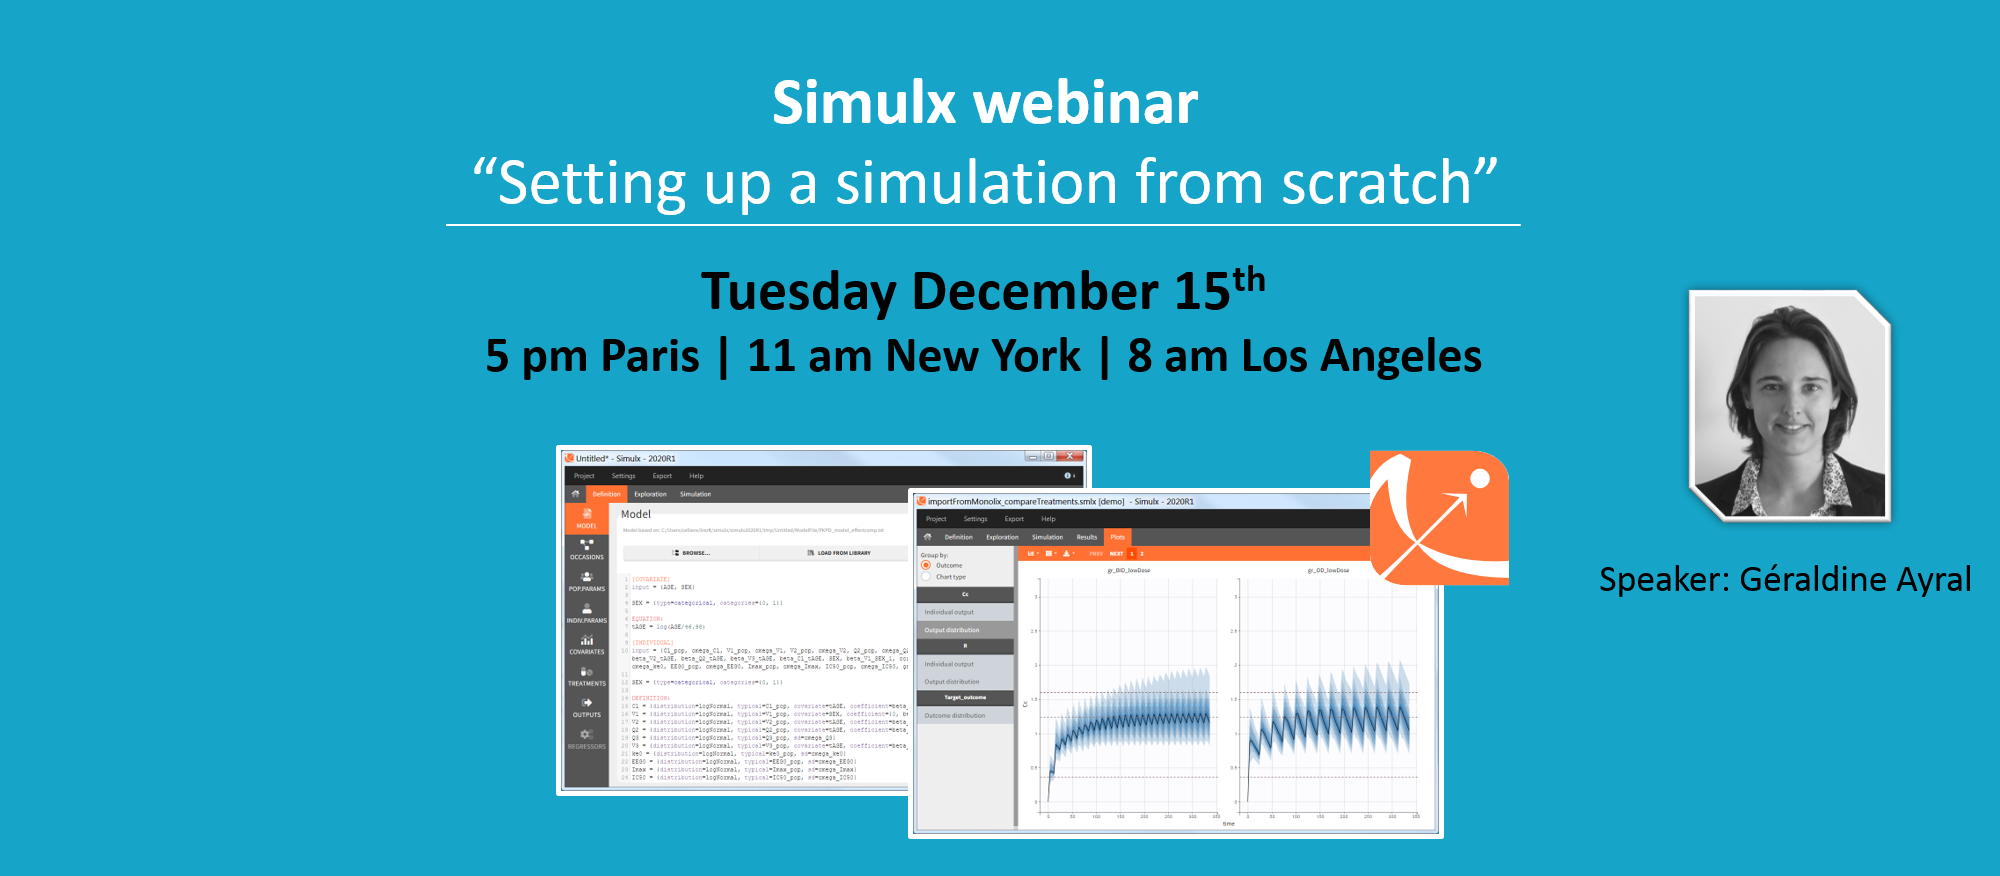 Simulx webinar “Setting up a simulation from scratch”